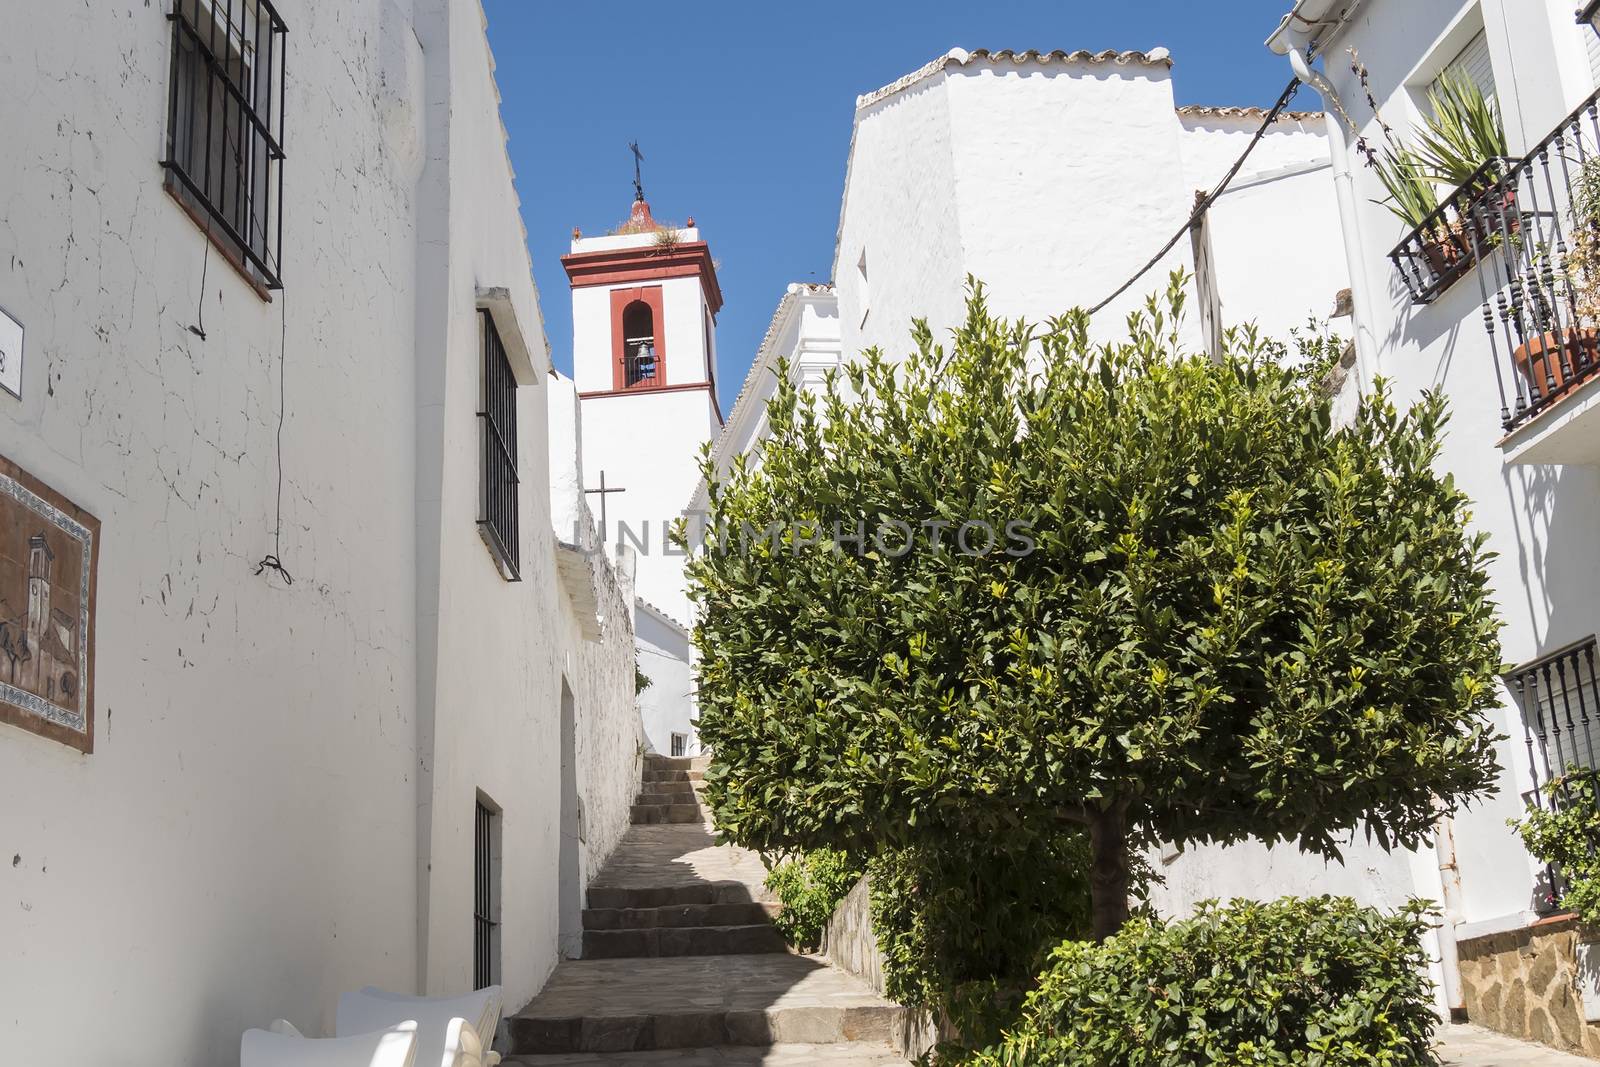 Typical white Andalusian village street in Benaocaz, Cadiz, Spain